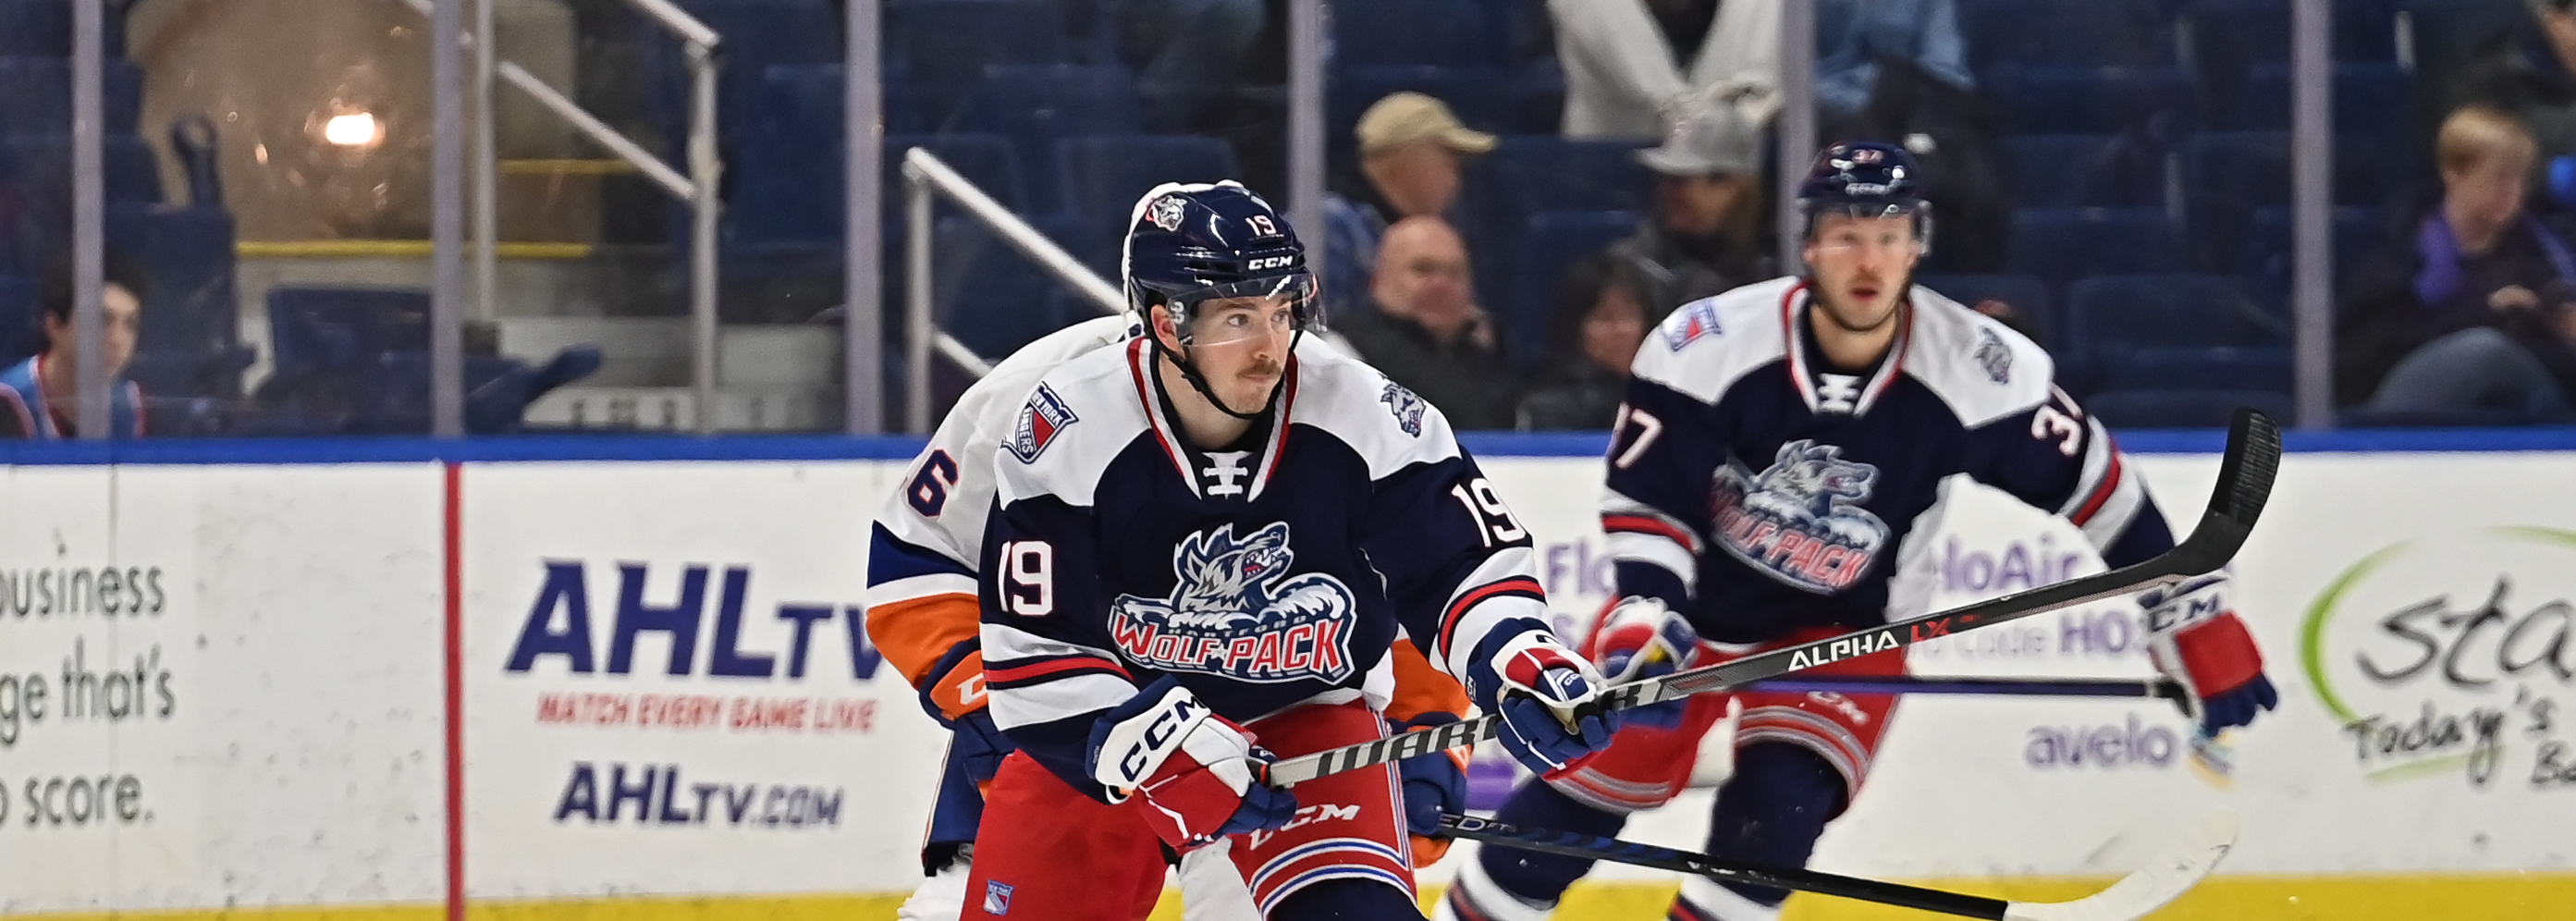 PRE-GAME REPORT: WOLF PACK HOST ISLANDERS IN ROUND FOUR OF THE ‘BATTLE OF CONNECTICUT’